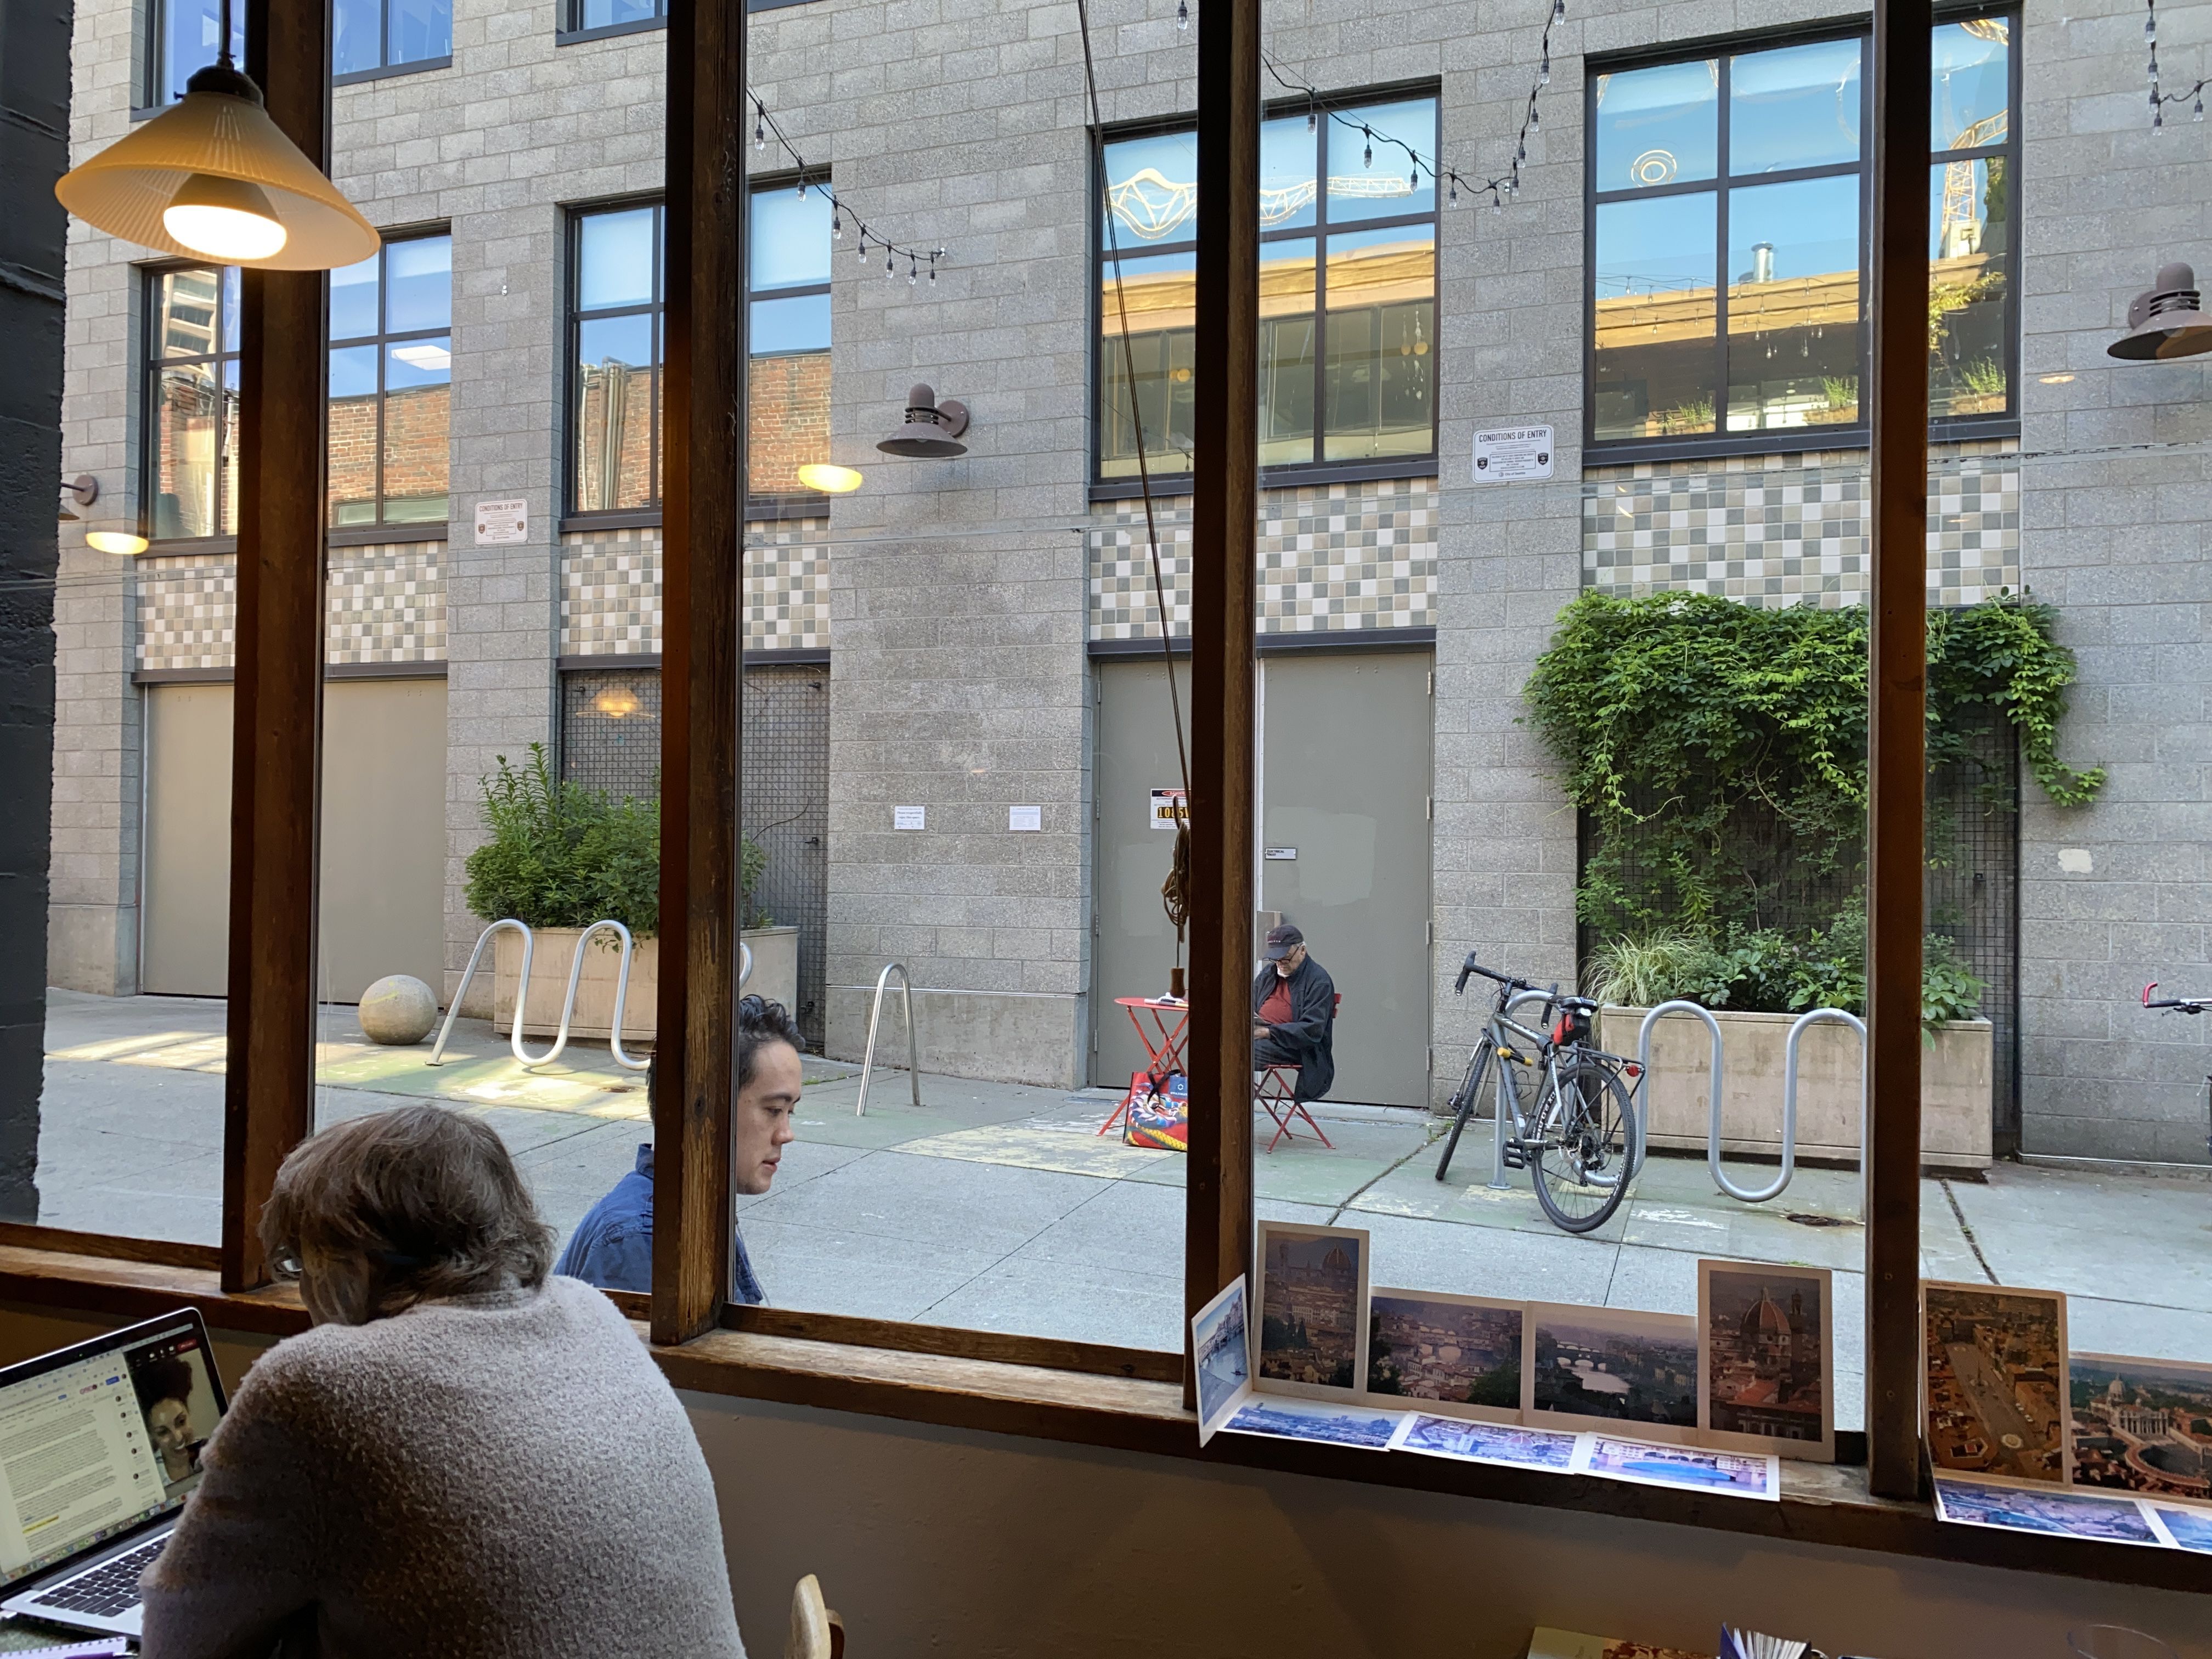 A man sits in front of large cafe windows with books on the windowsill and a view of a more modern building outside.